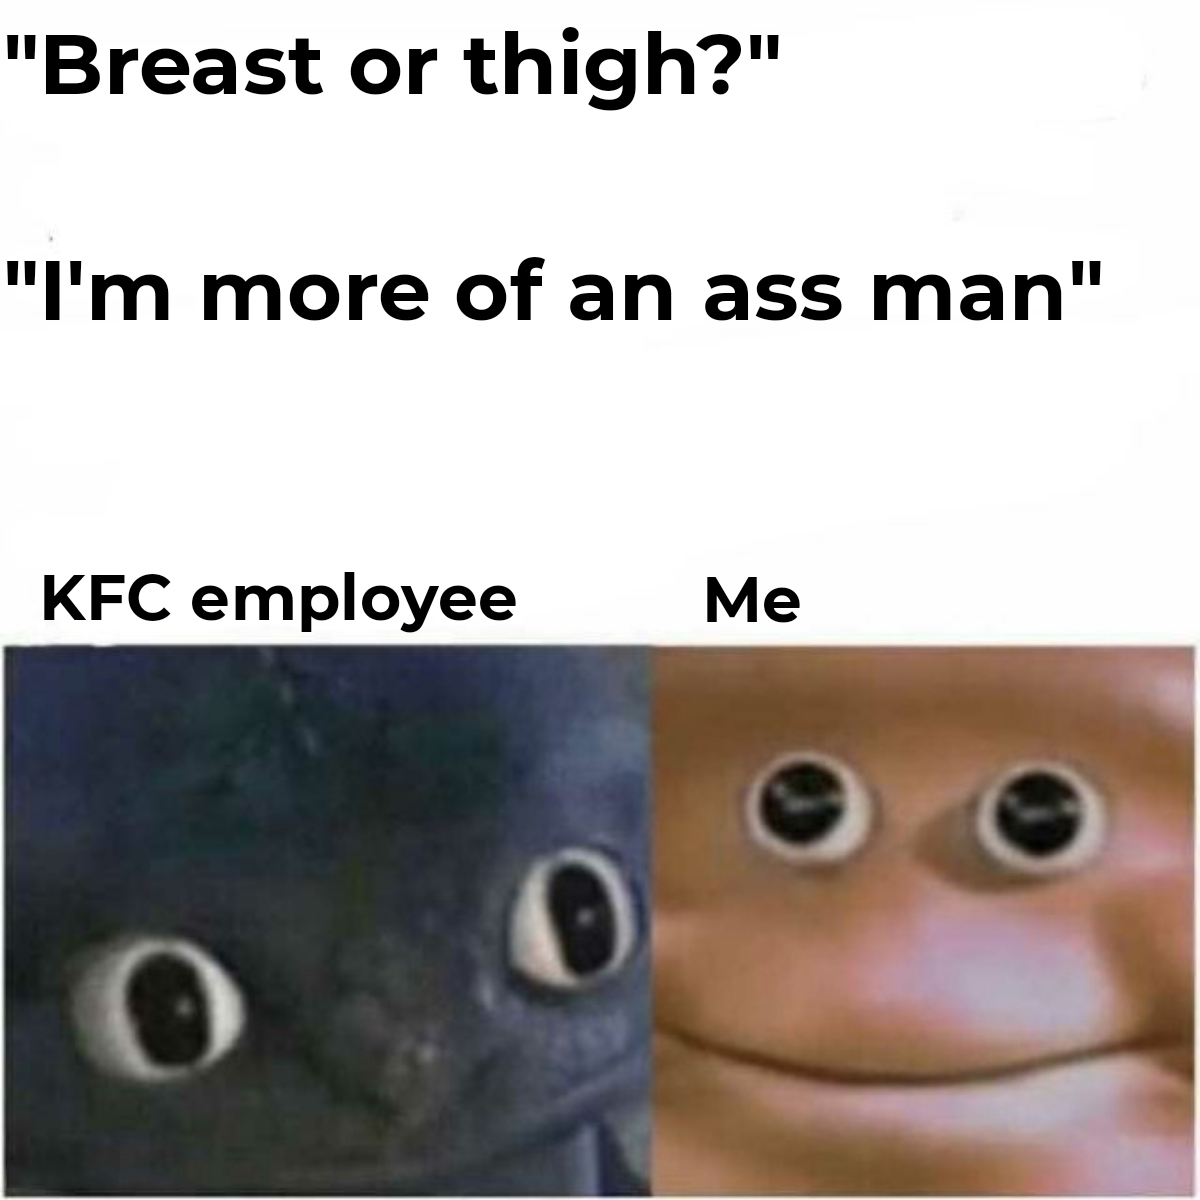 funny memes - dank memes - toothless and potato face meme - "Breast or thigh?" "I'm more of an ass man" Kfc employee Me O